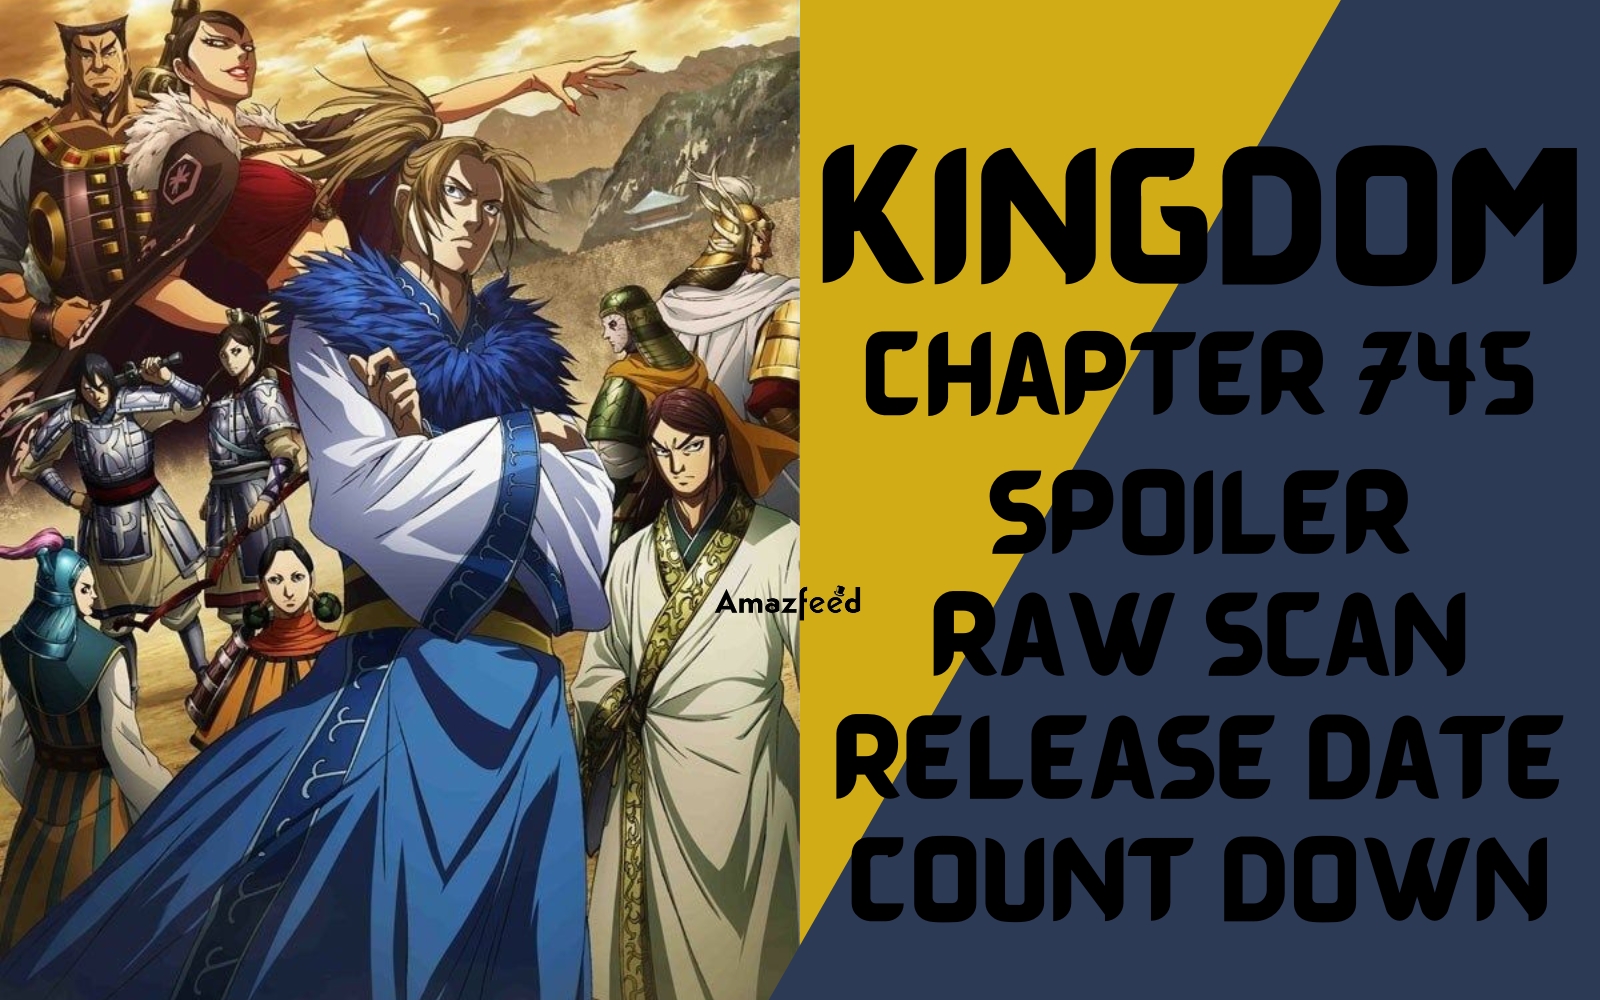 Kingdom Chapter 745 Spoiler, Raw Scan, Countdown, Color Page, Release Date